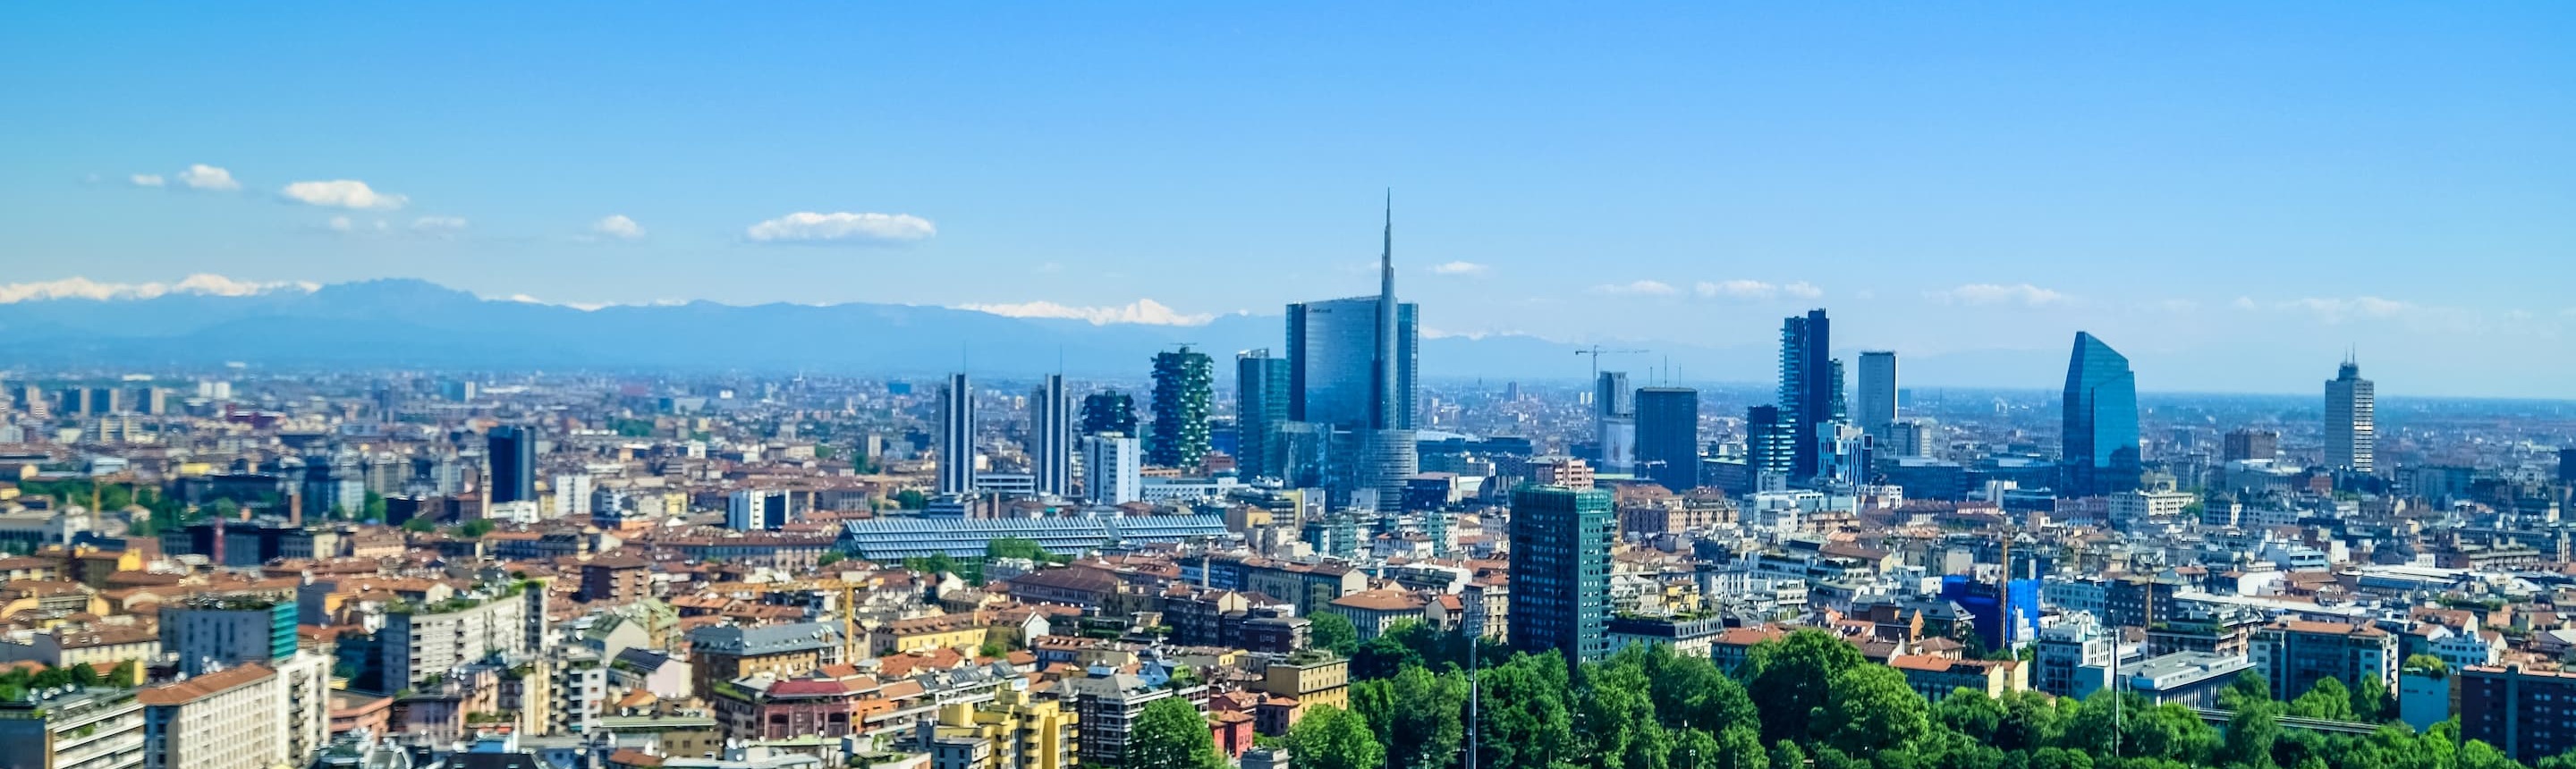 A beautiful picture of the Milan skyline